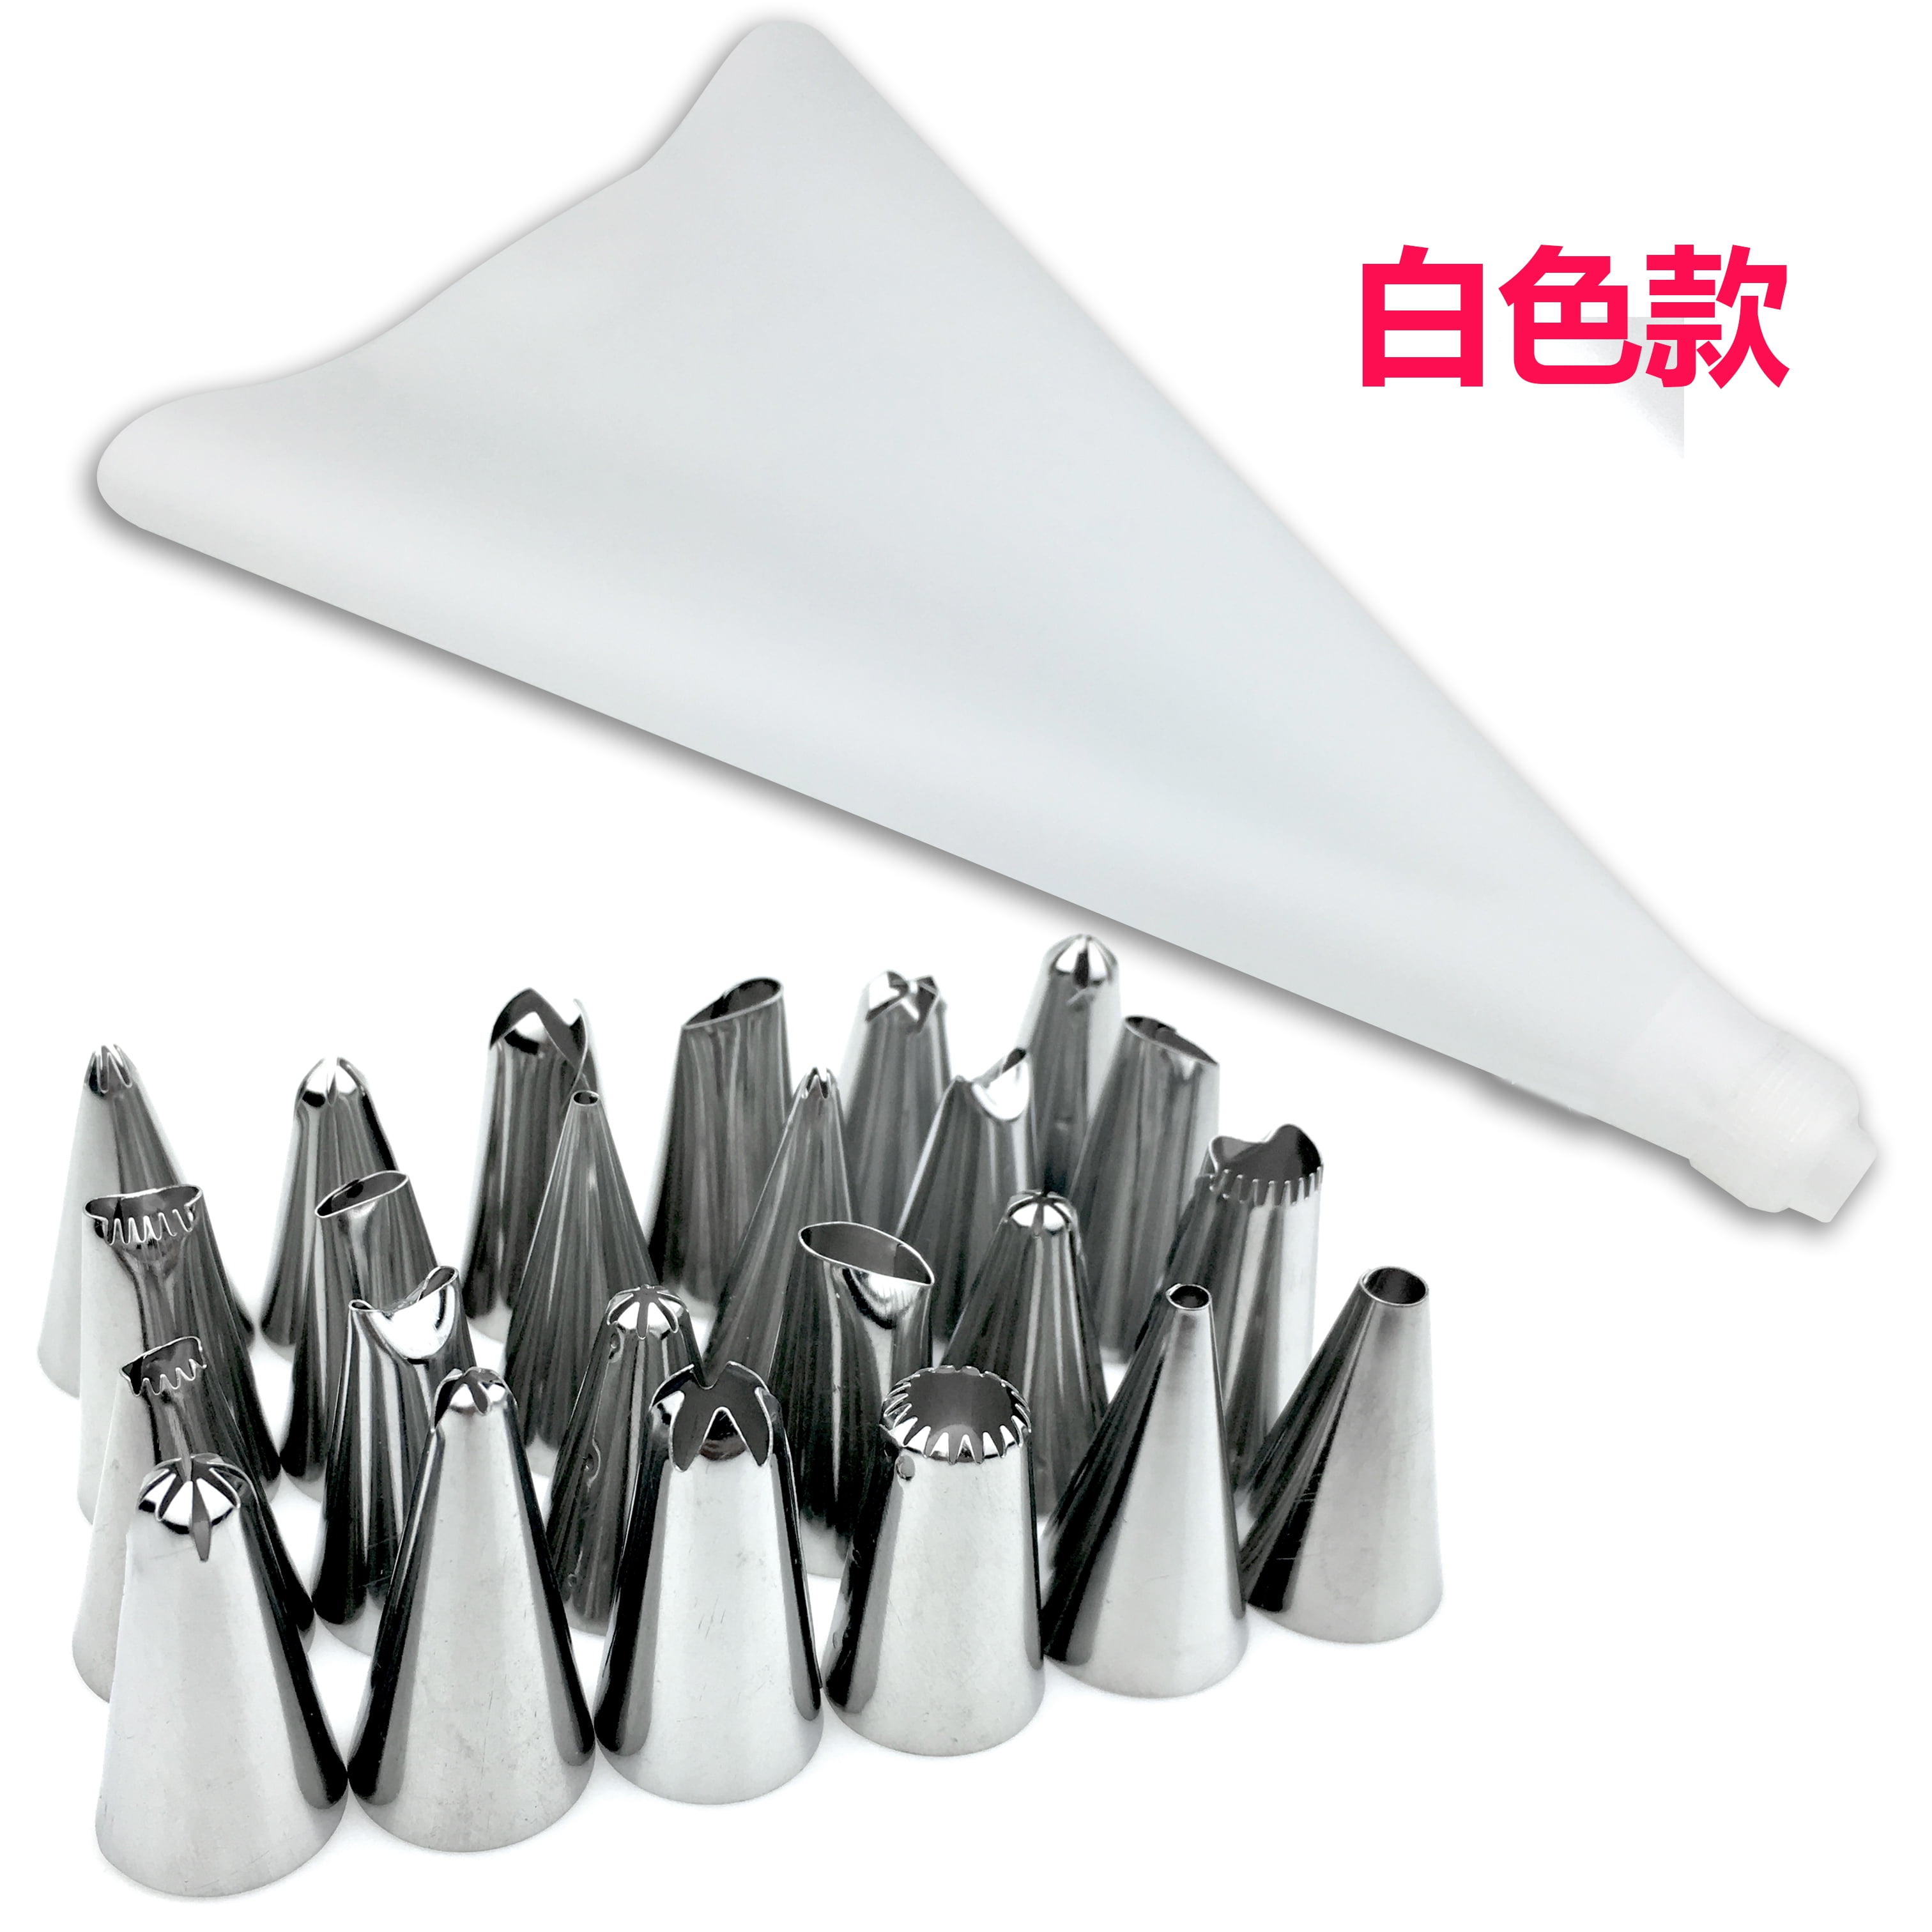 Details about   9pcs Open Star Cream Piping Nozzles Cake Decorating Set Metal Pastry Bag T Tu BA 